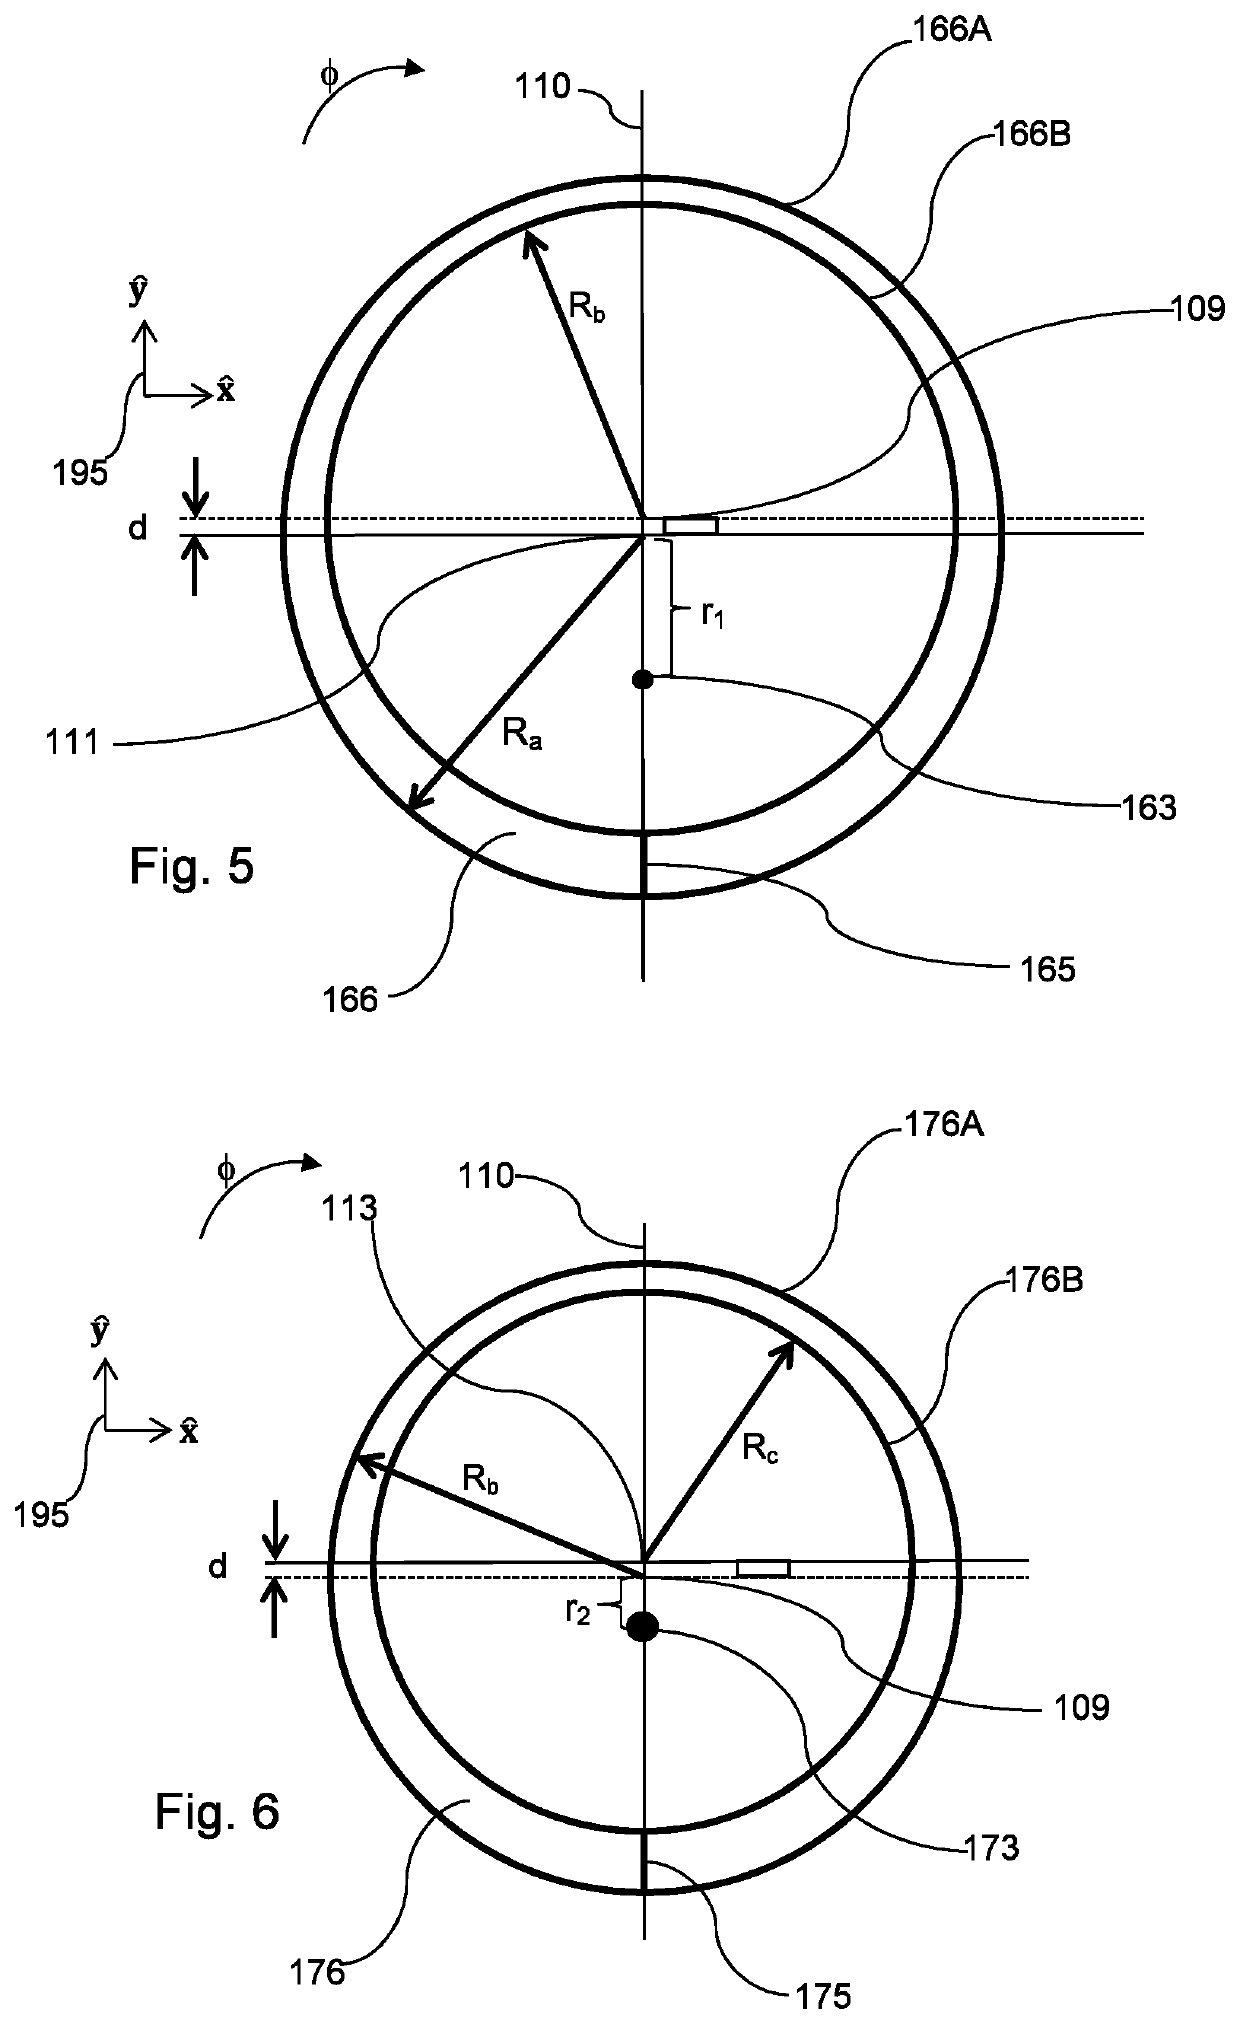 Windage shield system for a gas turbine engine